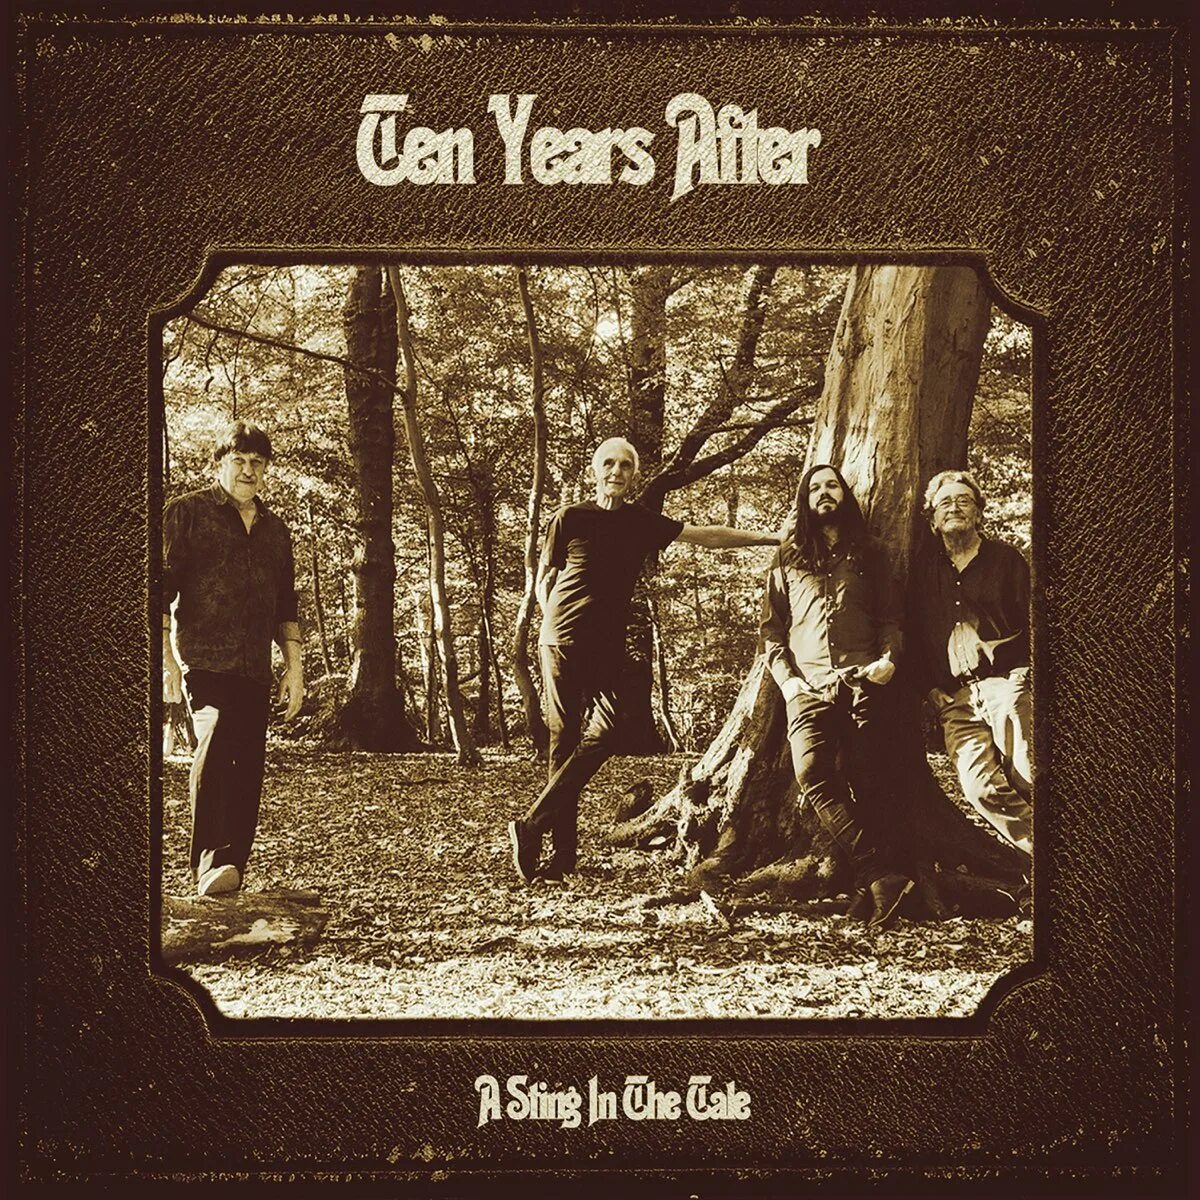 Ten years after 2017 a Sting in the Tale. Группа ten years after after альбомы a Sting in the Tale. Рок группа ten years after. Lost Soul группа.